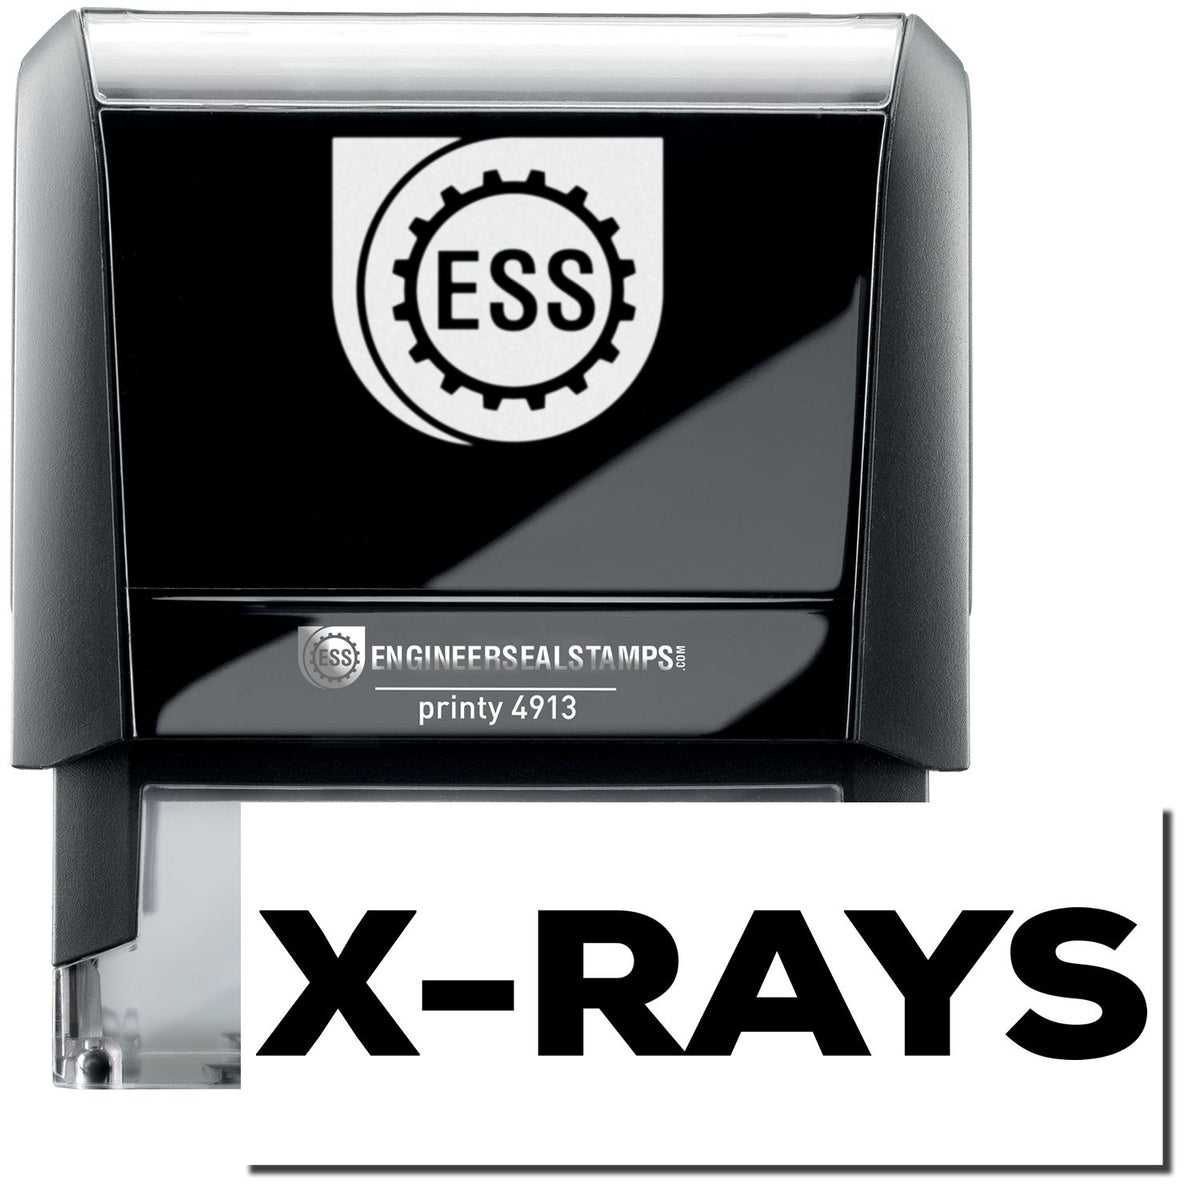 A self-inking stamp with a stamped image showing how the text &quot;X-RAYS&quot; in a large bold font is displayed by it after stamping.